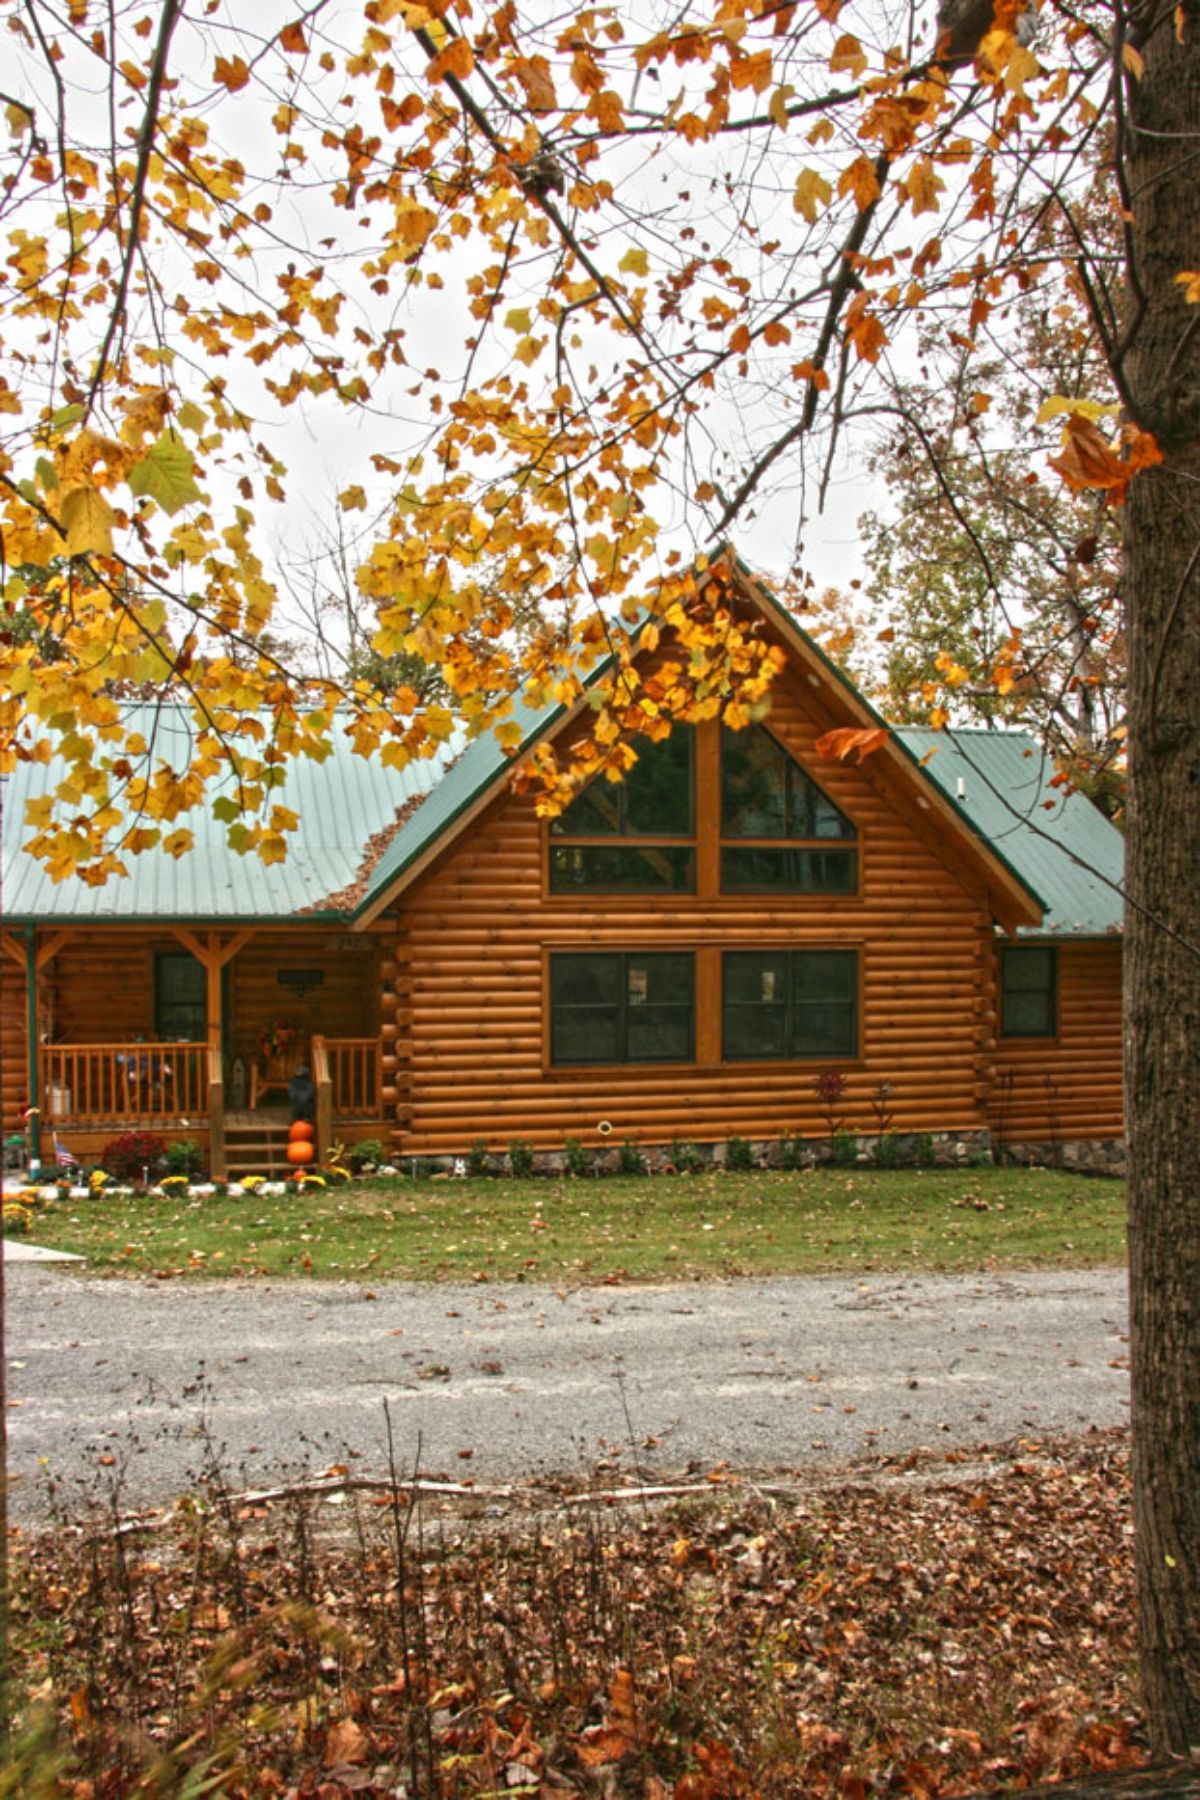 front porch and open windows on log cabin